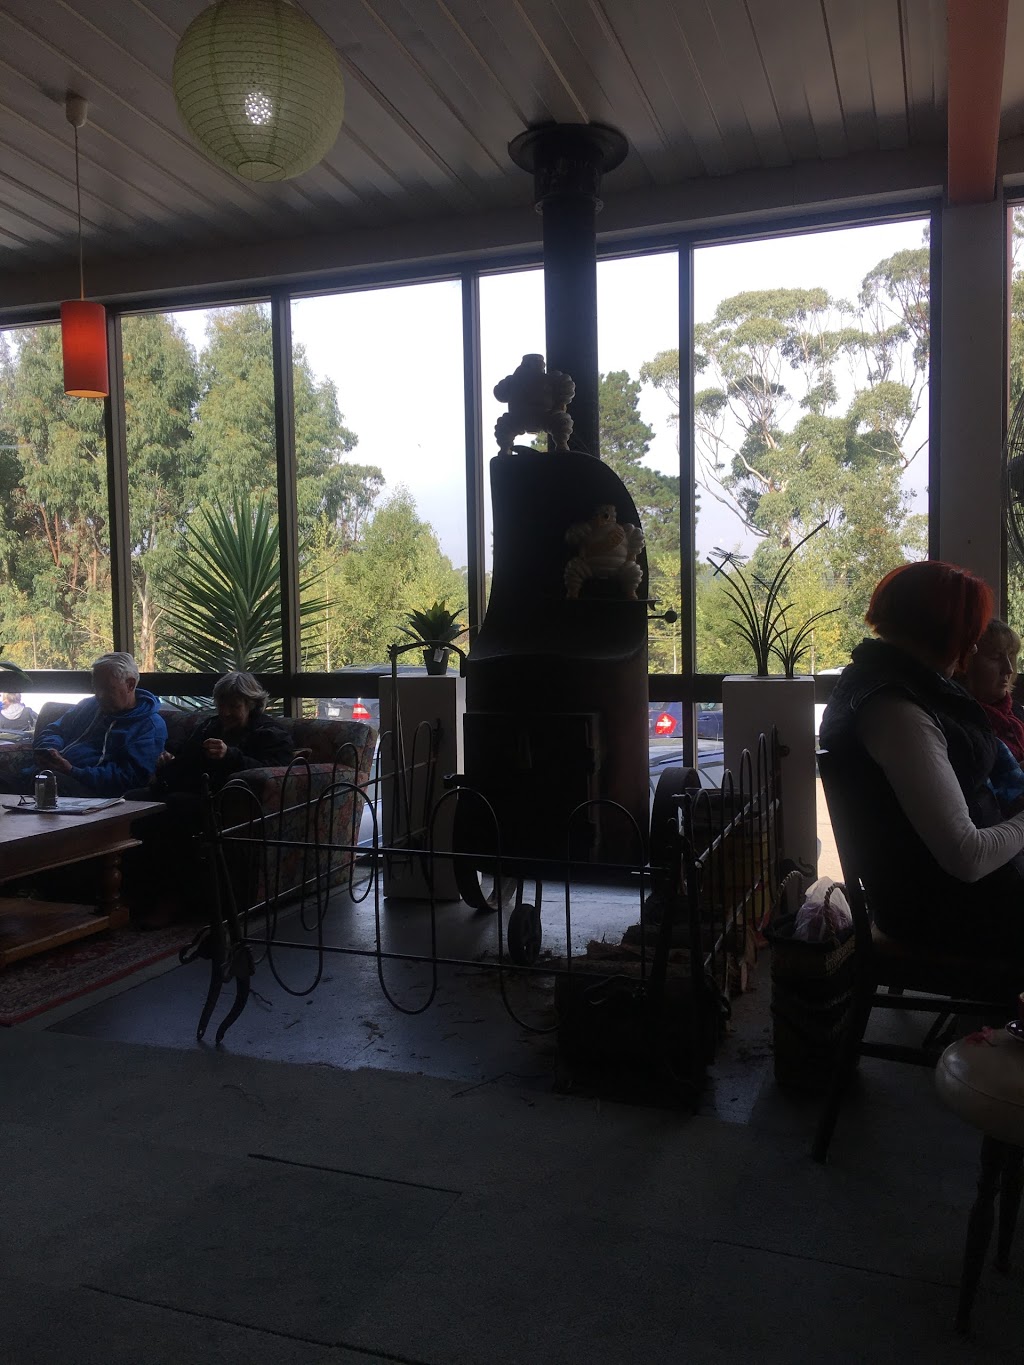 Mill Market Cafe | cafe | 105 Central Springs Rd, Daylesford VIC 3460, Australia | 0431104233 OR +61 431 104 233